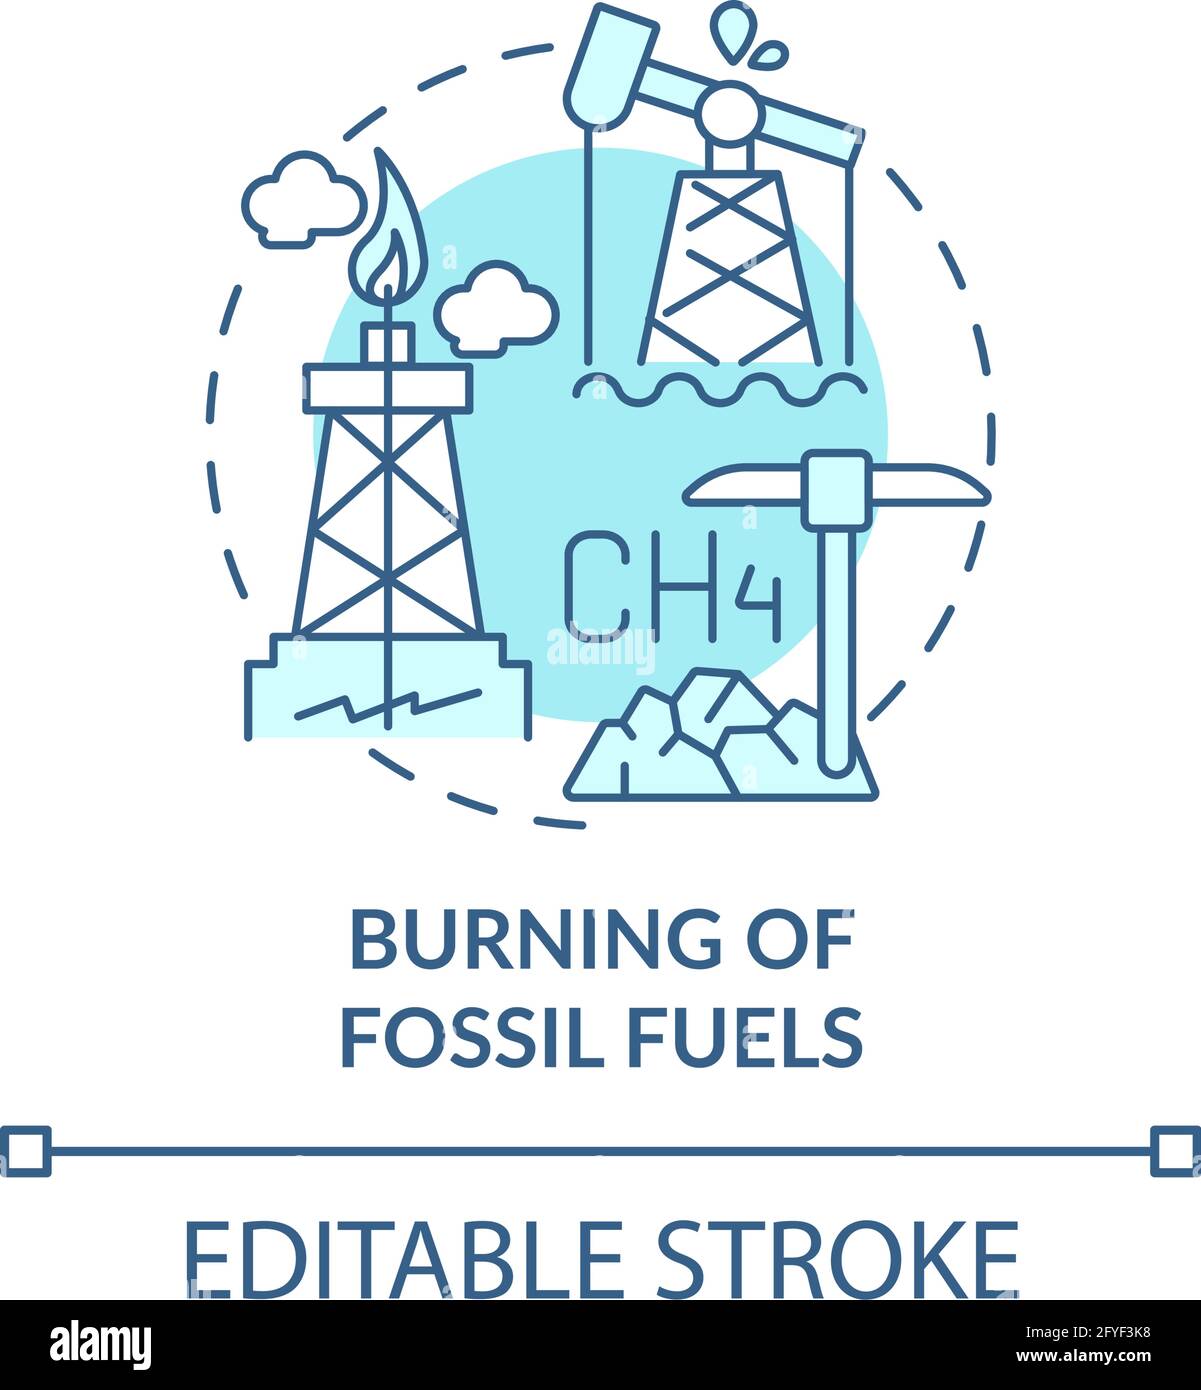 Fossil fuels burning concept icon Stock Vector